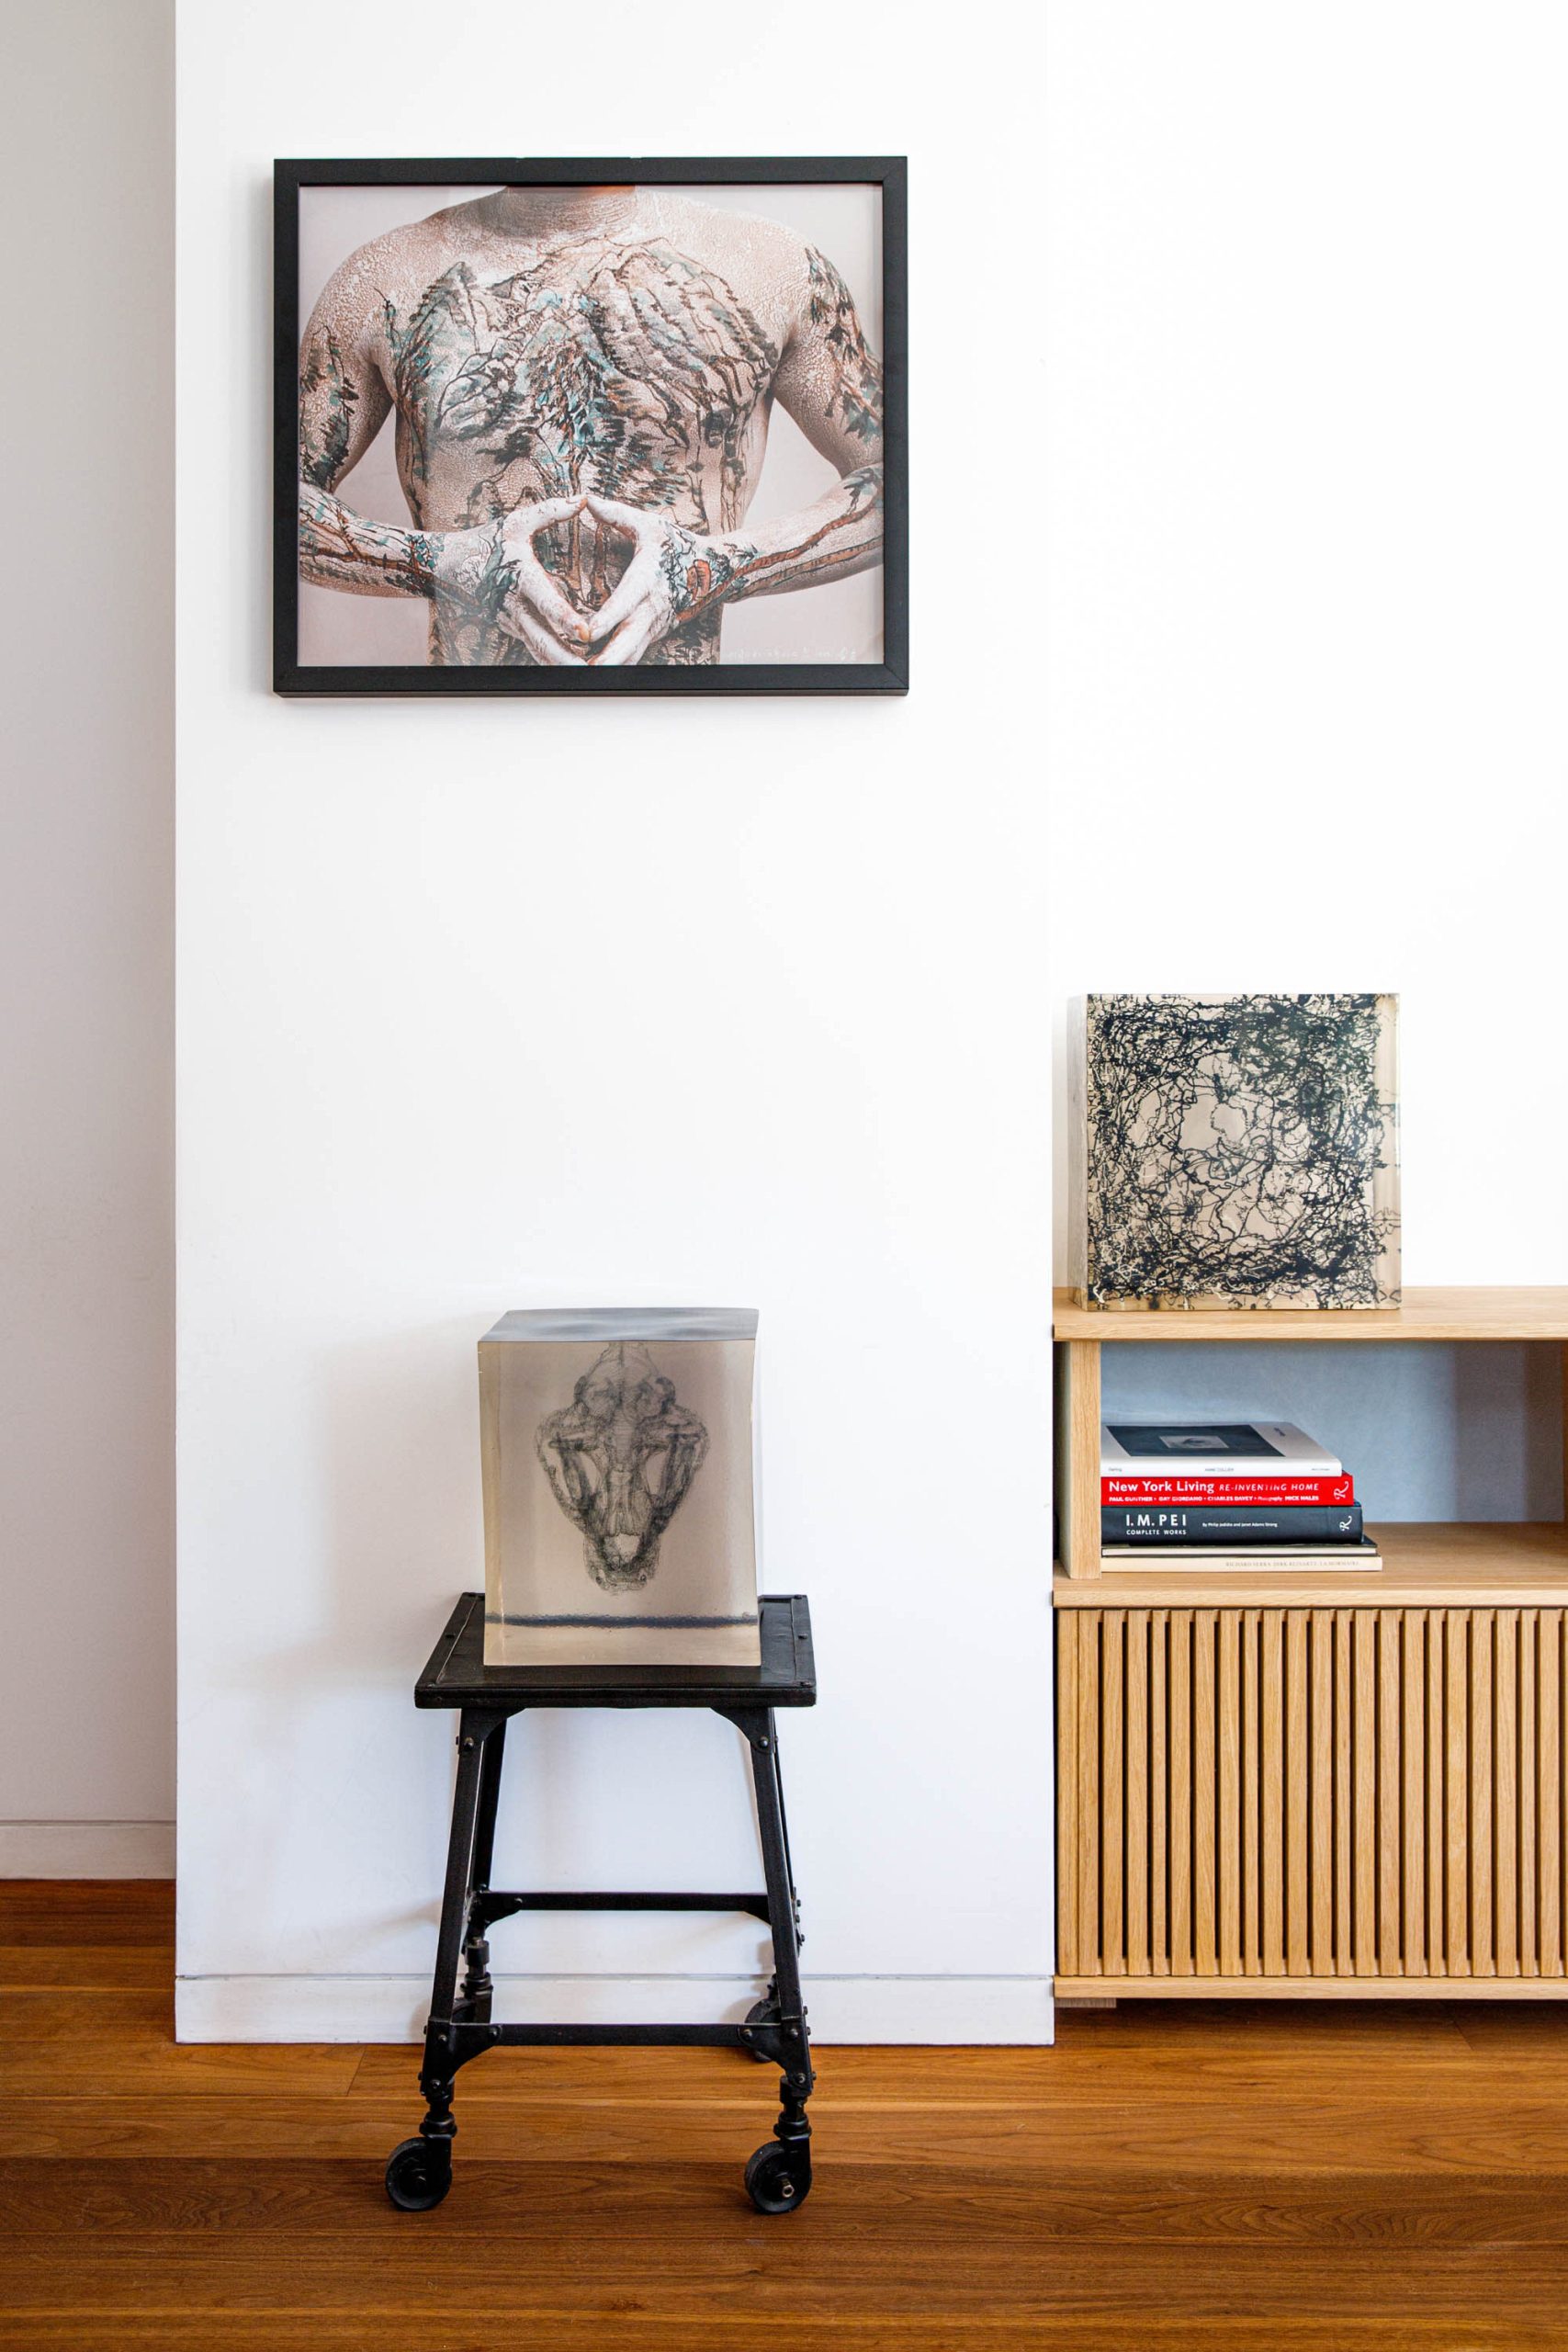 Greenpoint penthouse having the best interior design with Cromatic Fussion Credenza detail -pottery by Jessica Capone, Serra, Roman, And Williams Buildings and Interior - Natasa Tuohy Studio